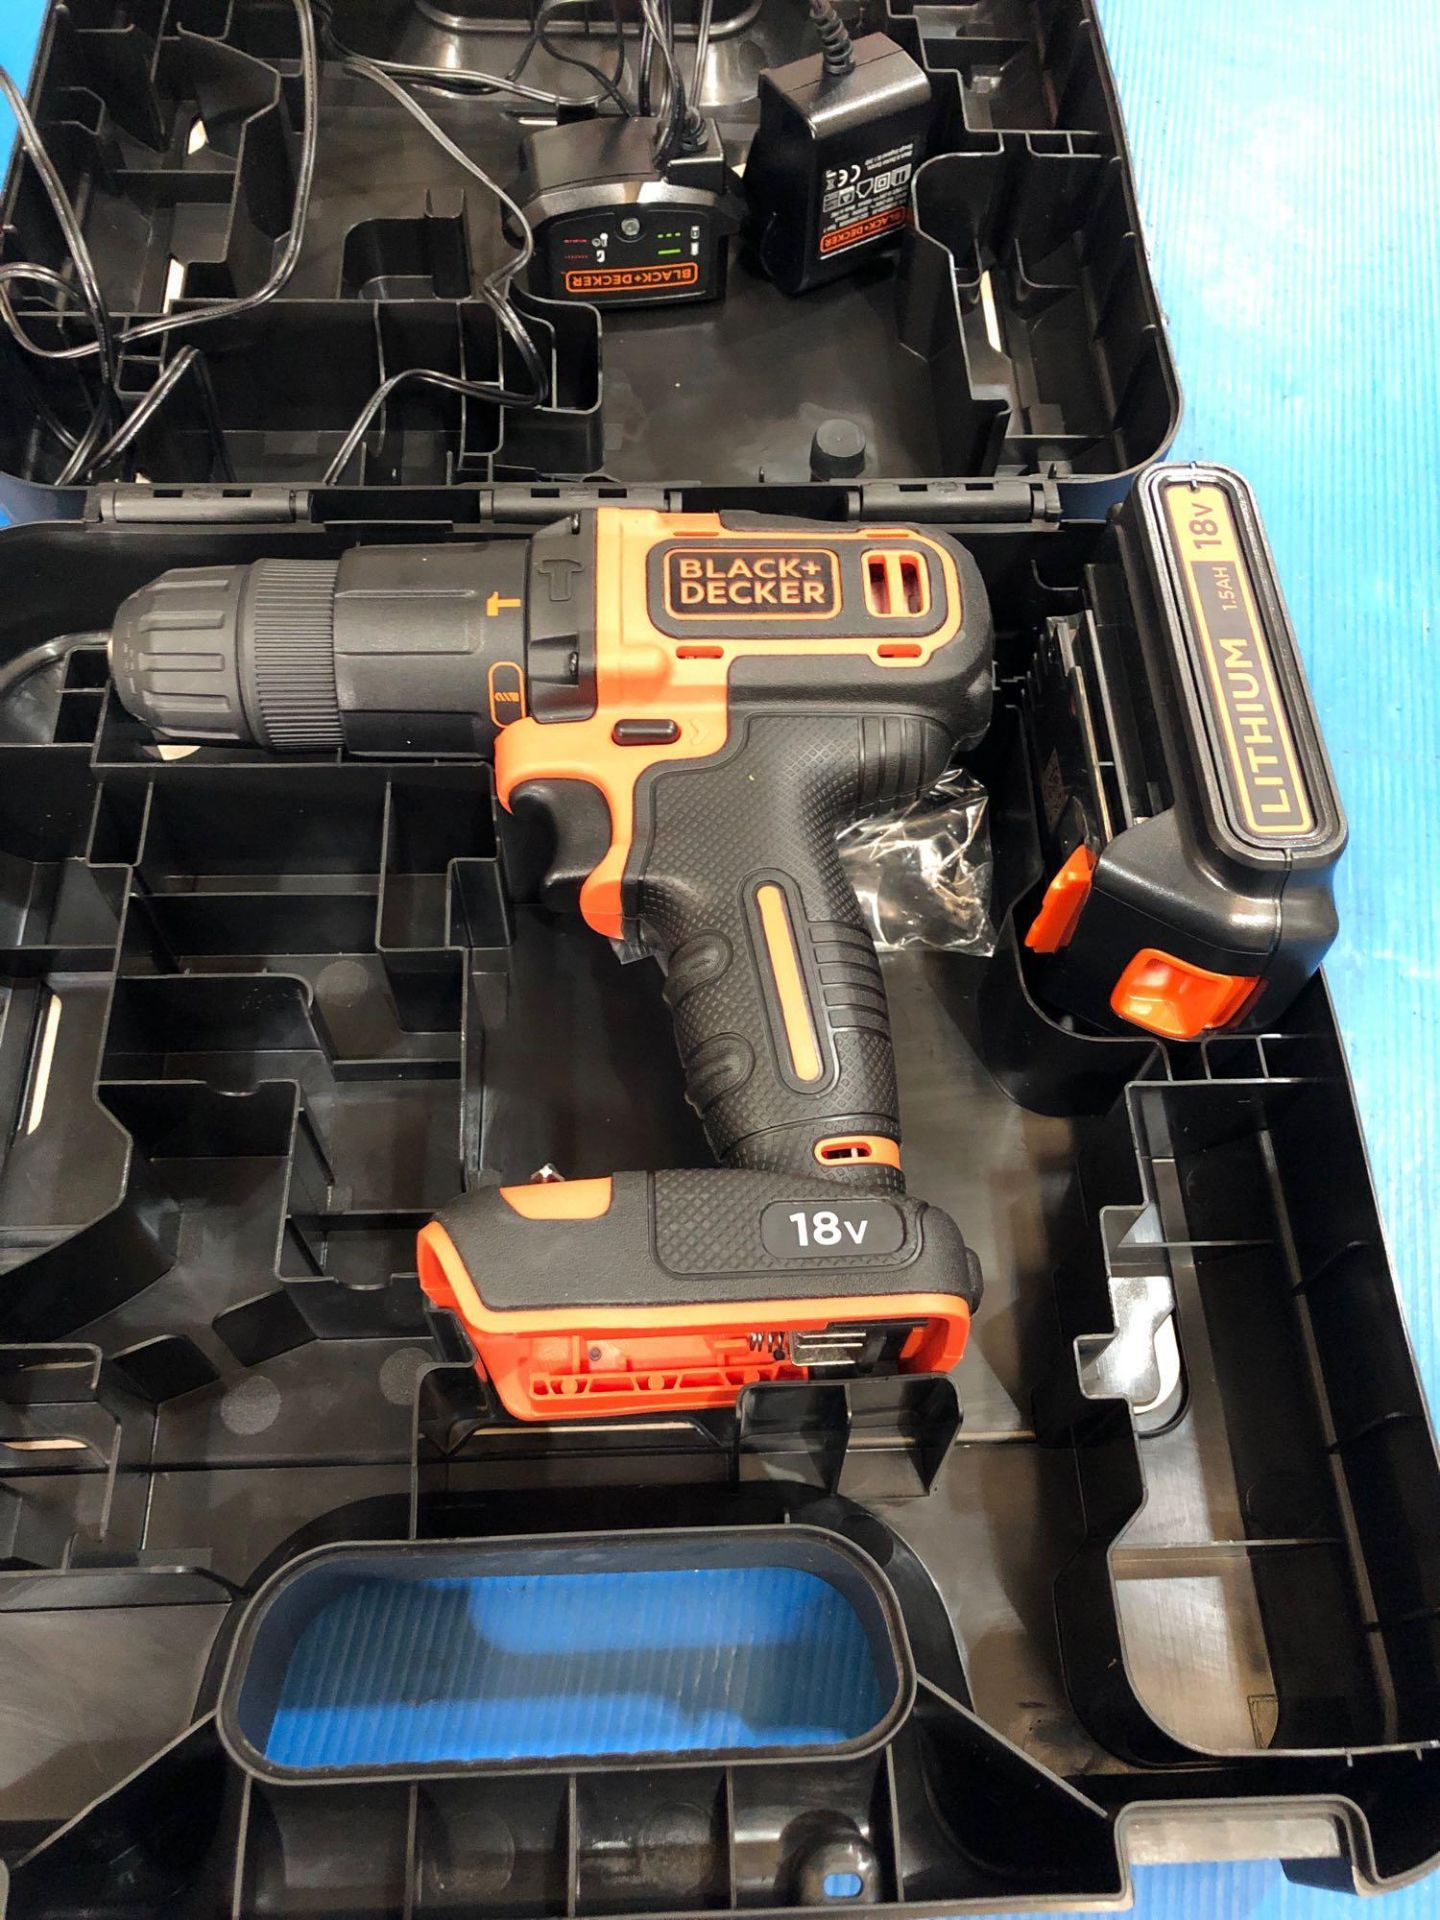 Black + Decker Cordless Hammer Drill with Battery - 18V, £50.00 RRP - Image 3 of 6